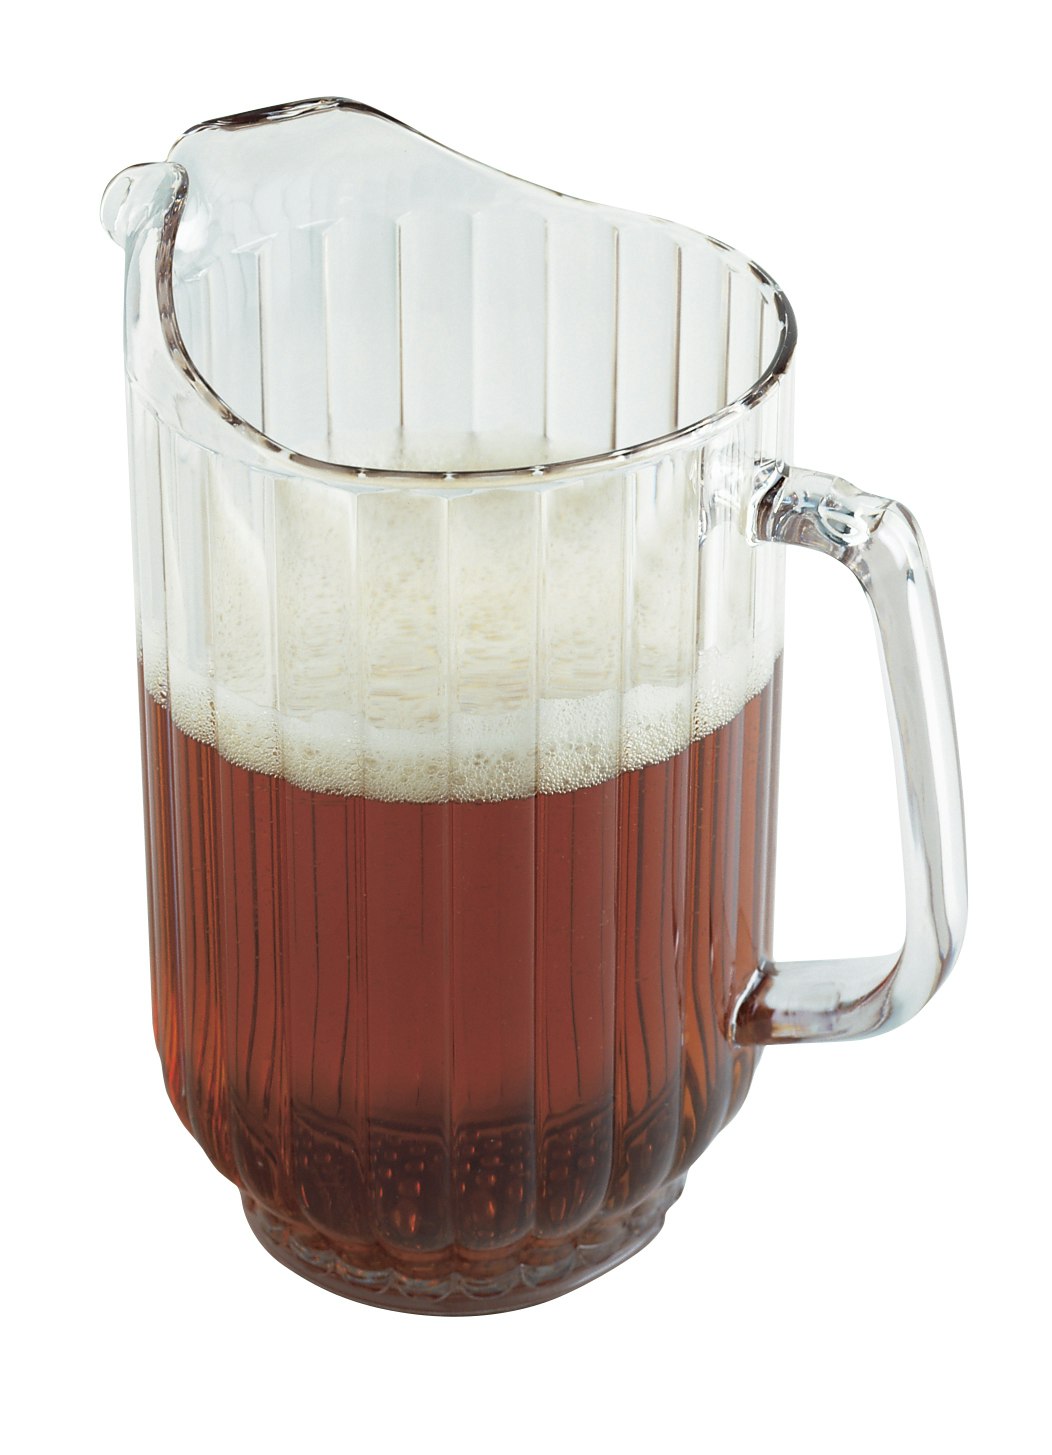 Choice 72 oz. Amber SAN Plastic Beverage Pitcher with 3 Spouts